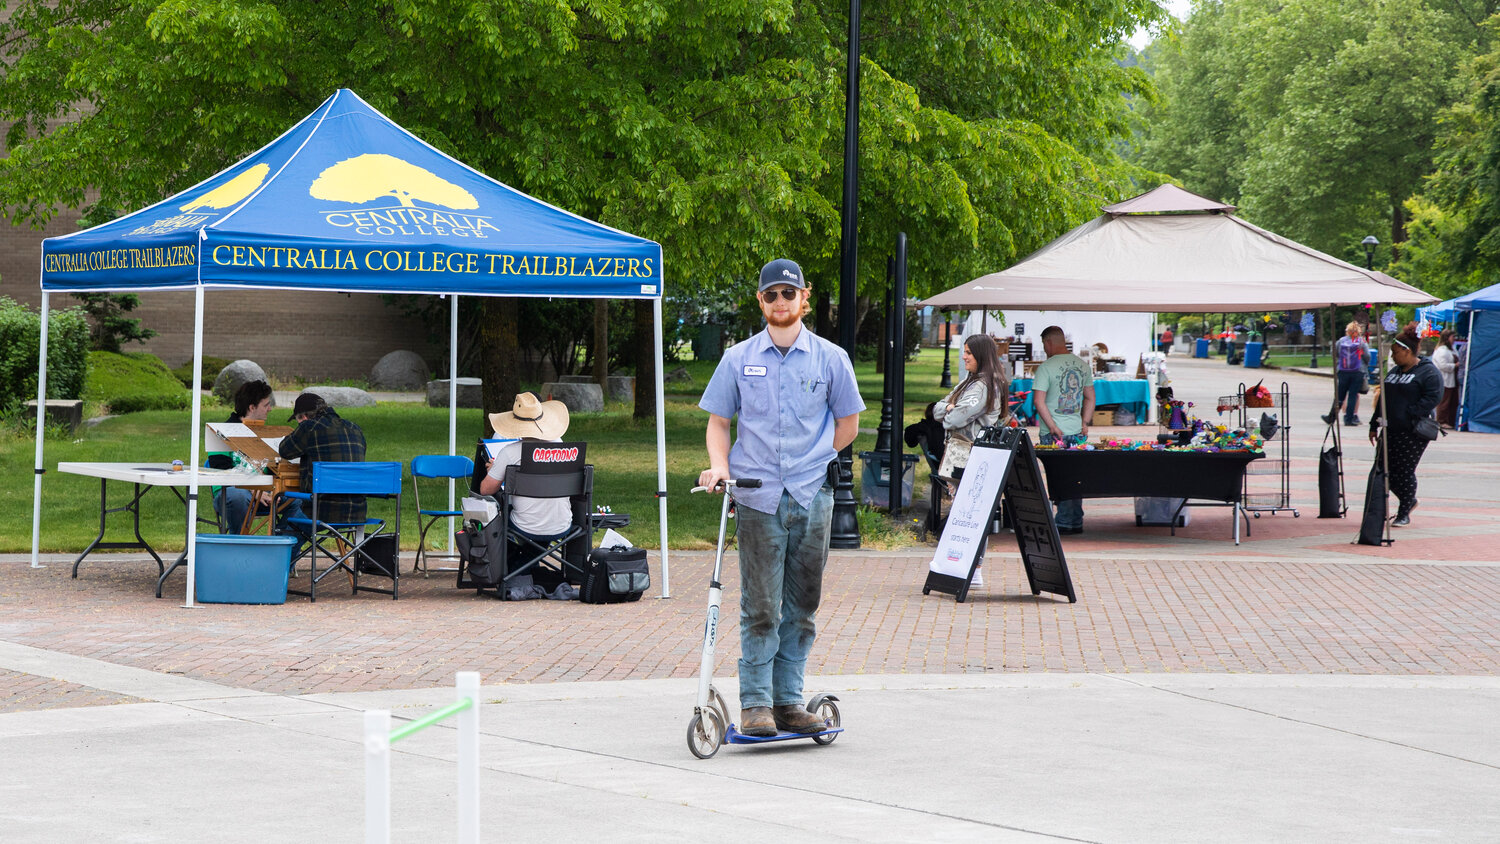 Oliver Macey rides a scooter through Spring Fest at Centralia College on Tuesday, May 23. The annual event, which is open to Centralia College students at no cost, continues from 10 a.m. to 2 p.m. Thursday on the plaza and esplanade.